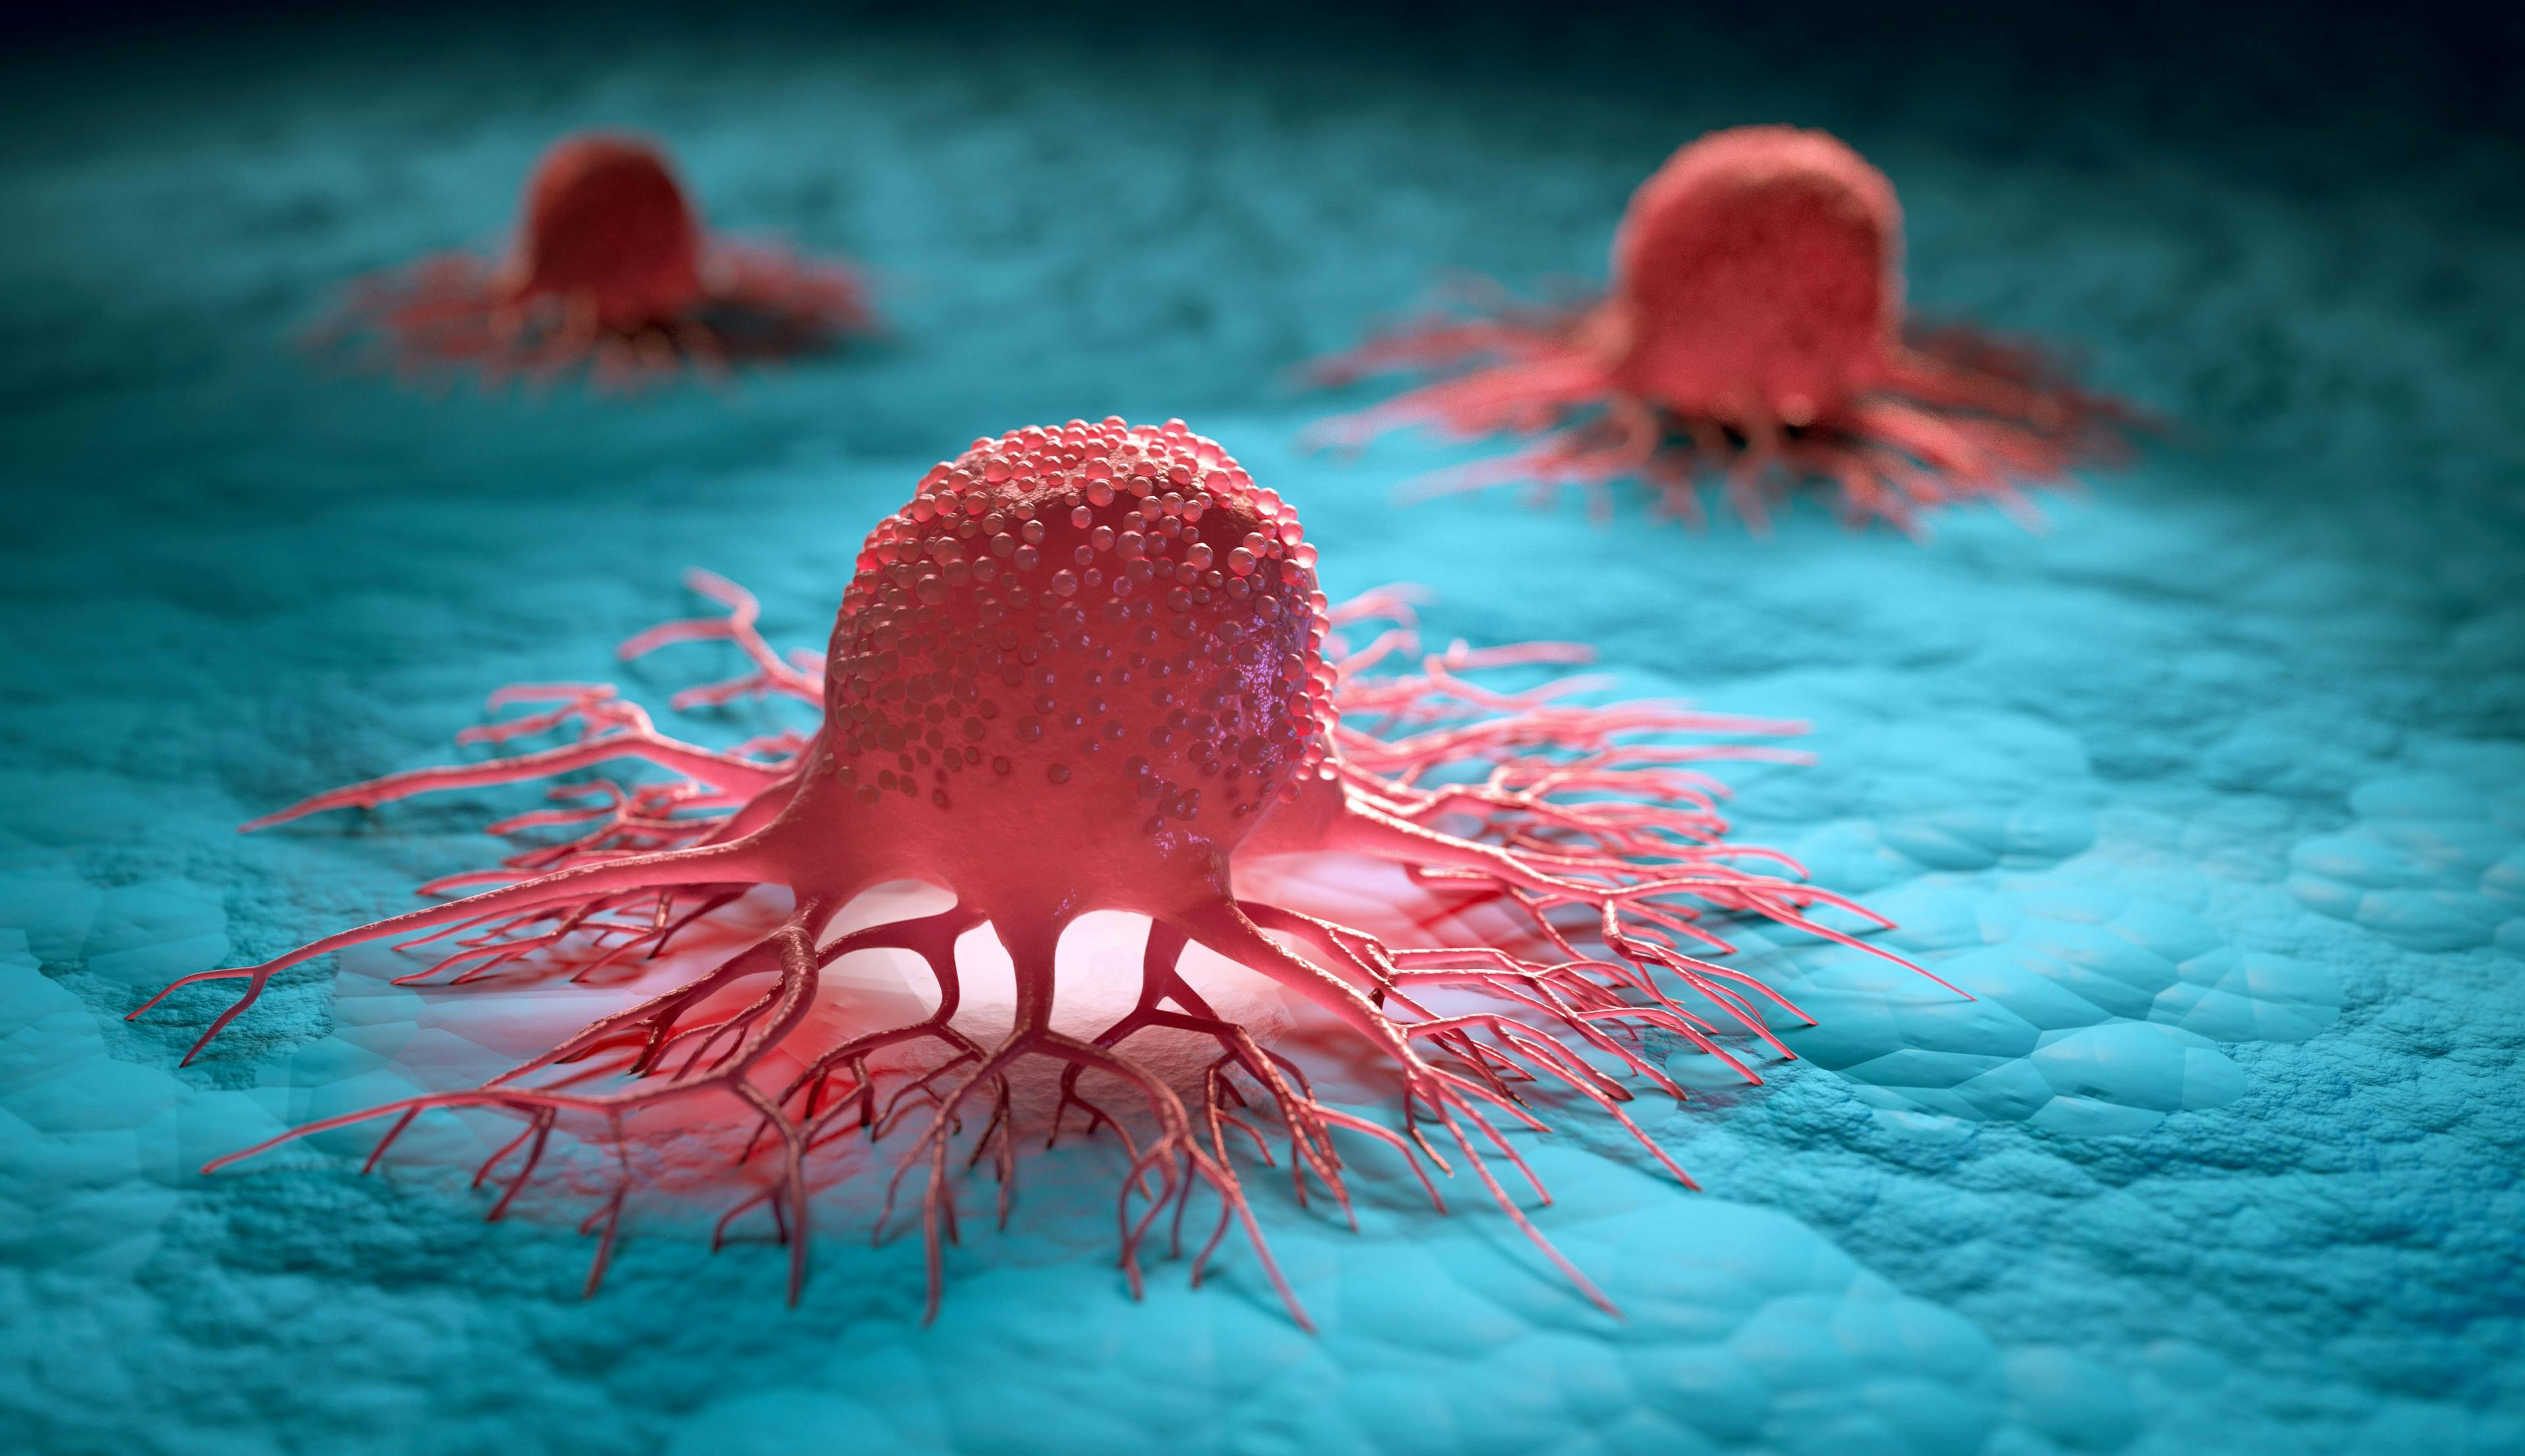 Image credit: peterschreiber.media | stock.adobe.com. Group of isolated cancer cells - 3d illustration